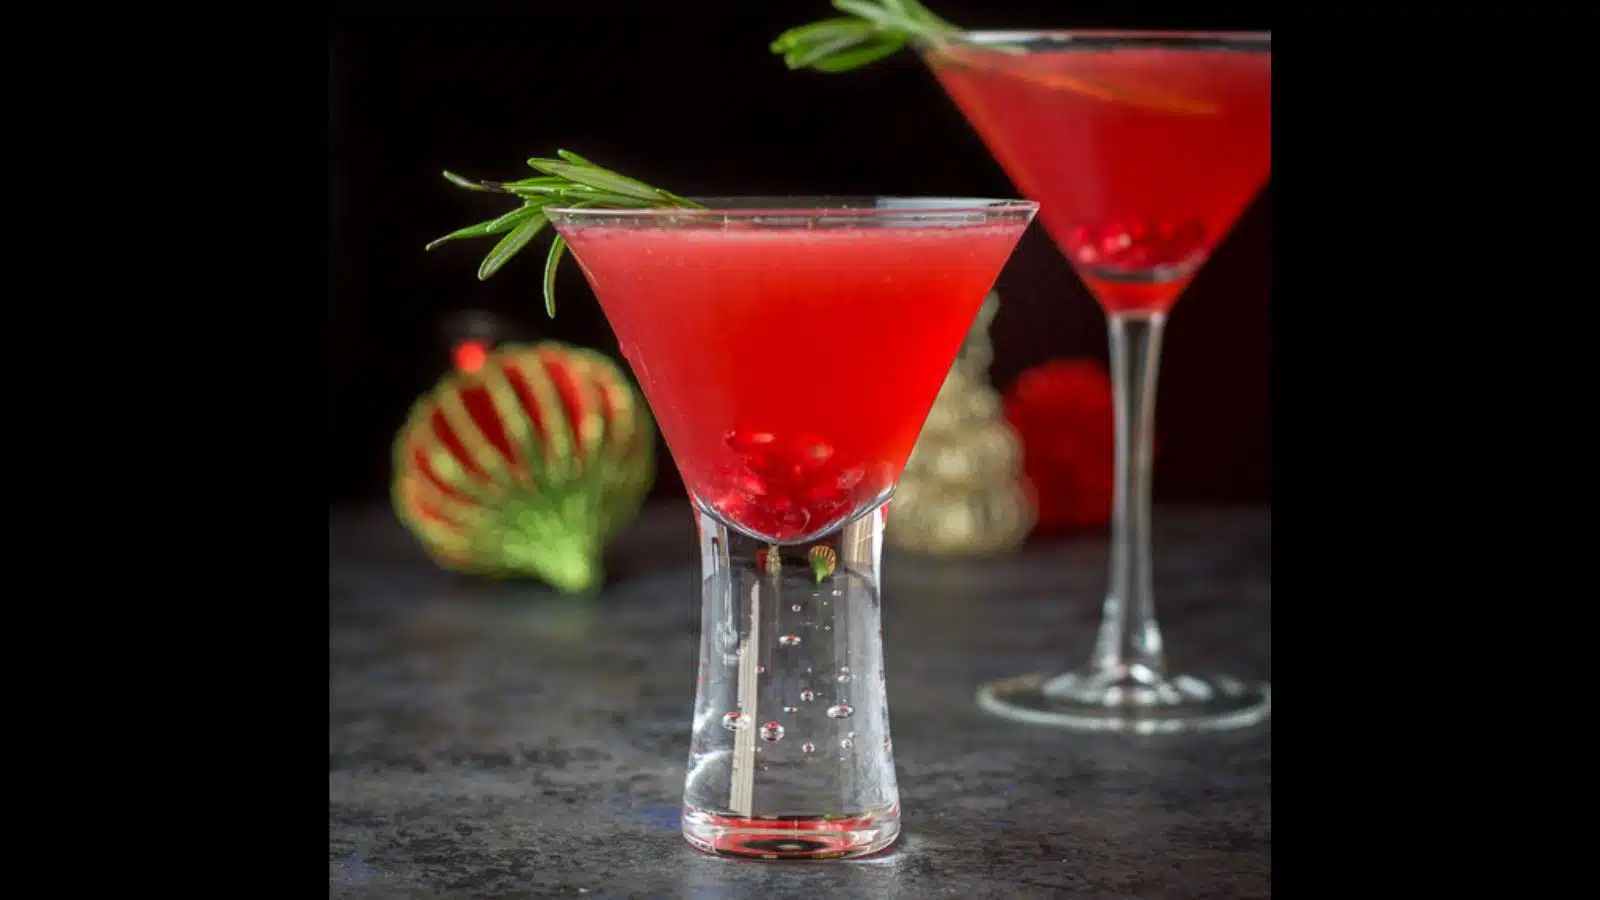 Two martini glasses filled with pomegranate seeds, rosemary sprigs in a red drink